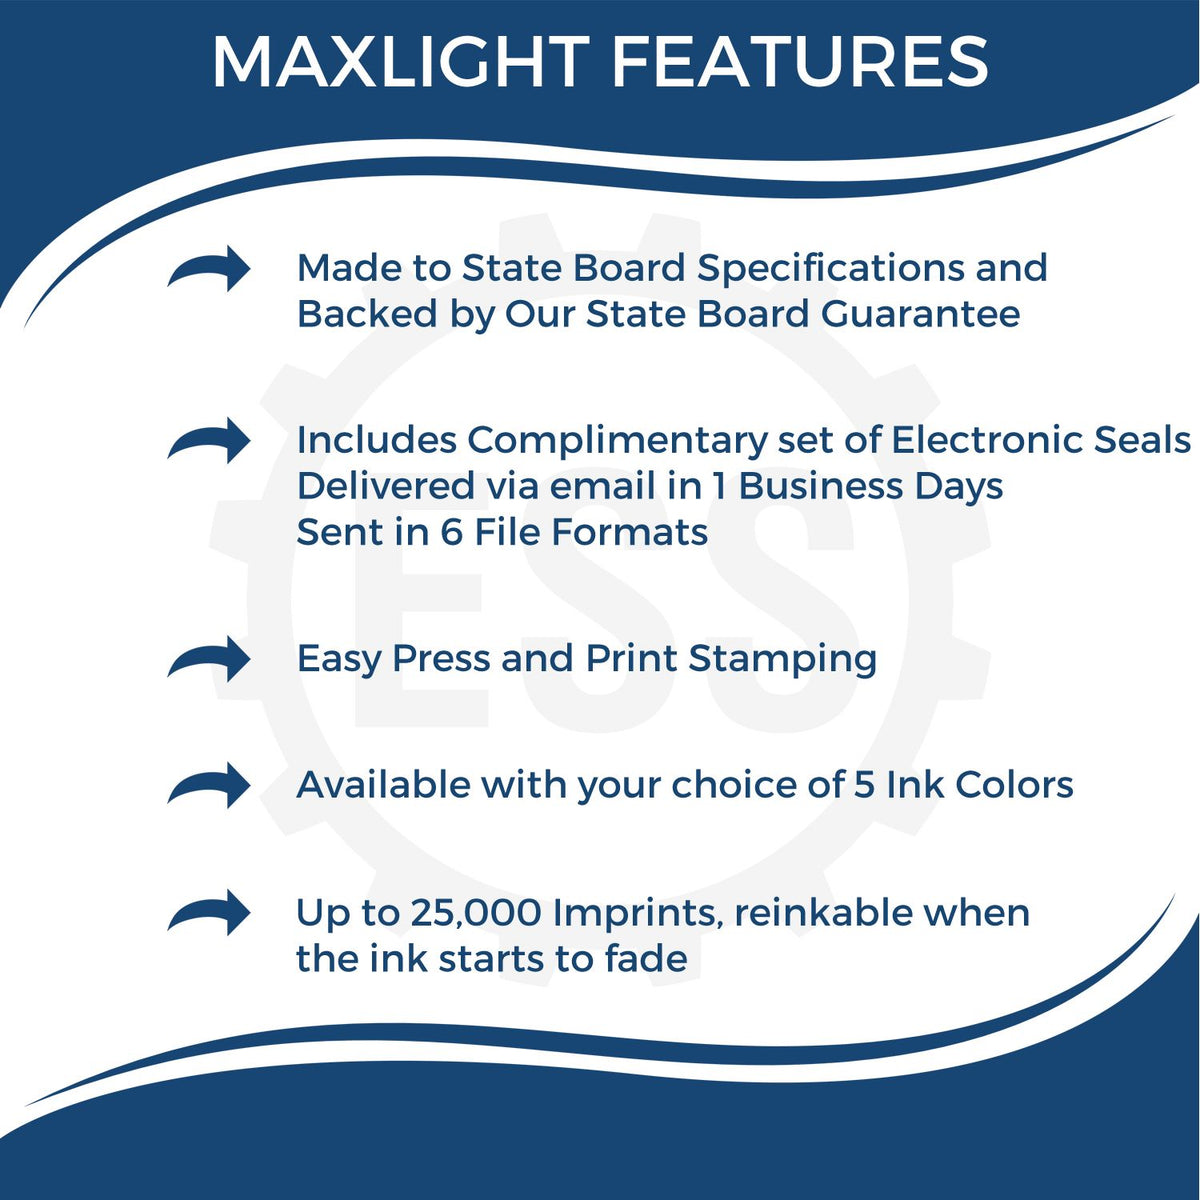 A picture of an infographic highlighting the selling points for the Premium MaxLight Pre-Inked Pennsylvania Engineering Stamp